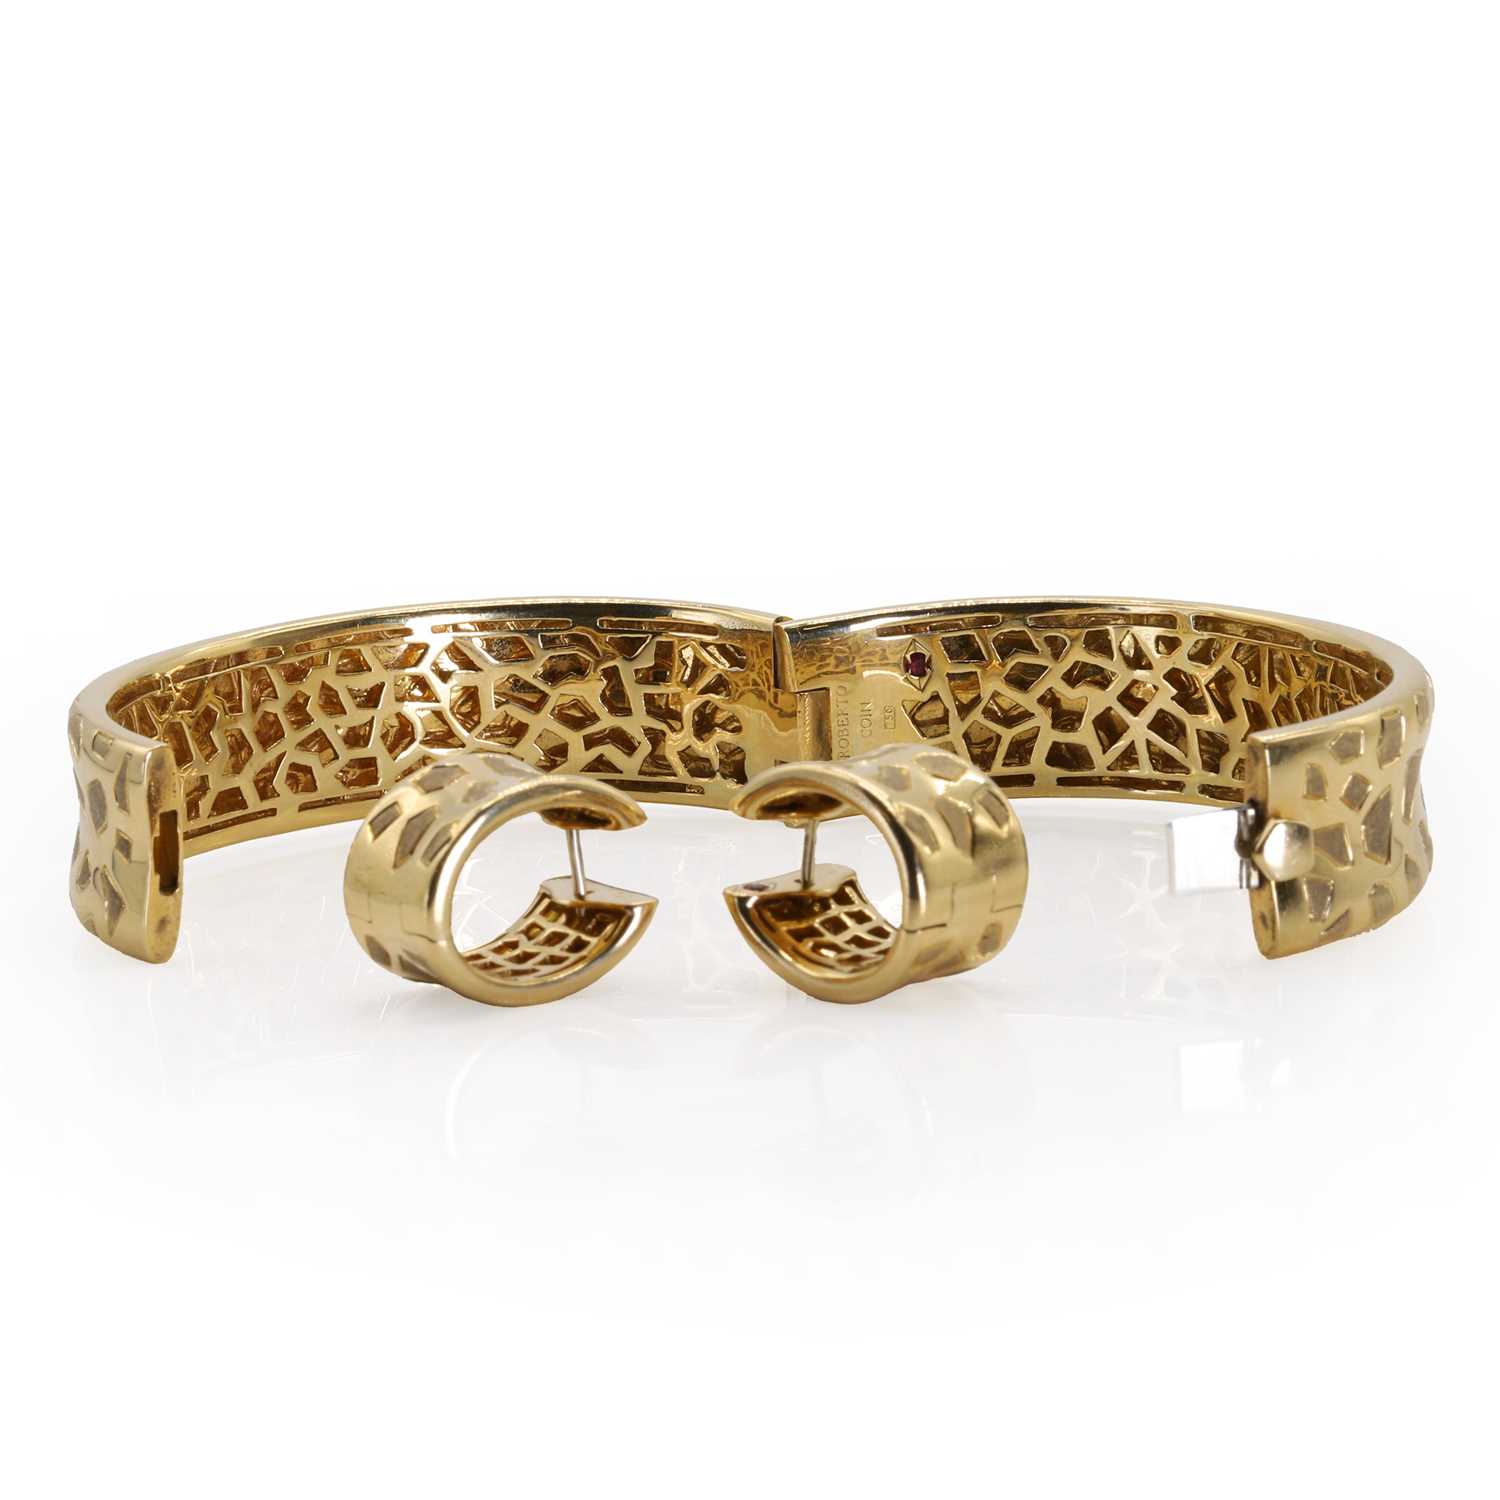 An 18ct gold 'Giraffe' bangle and earring set, by Roberto Coin, - Image 2 of 5